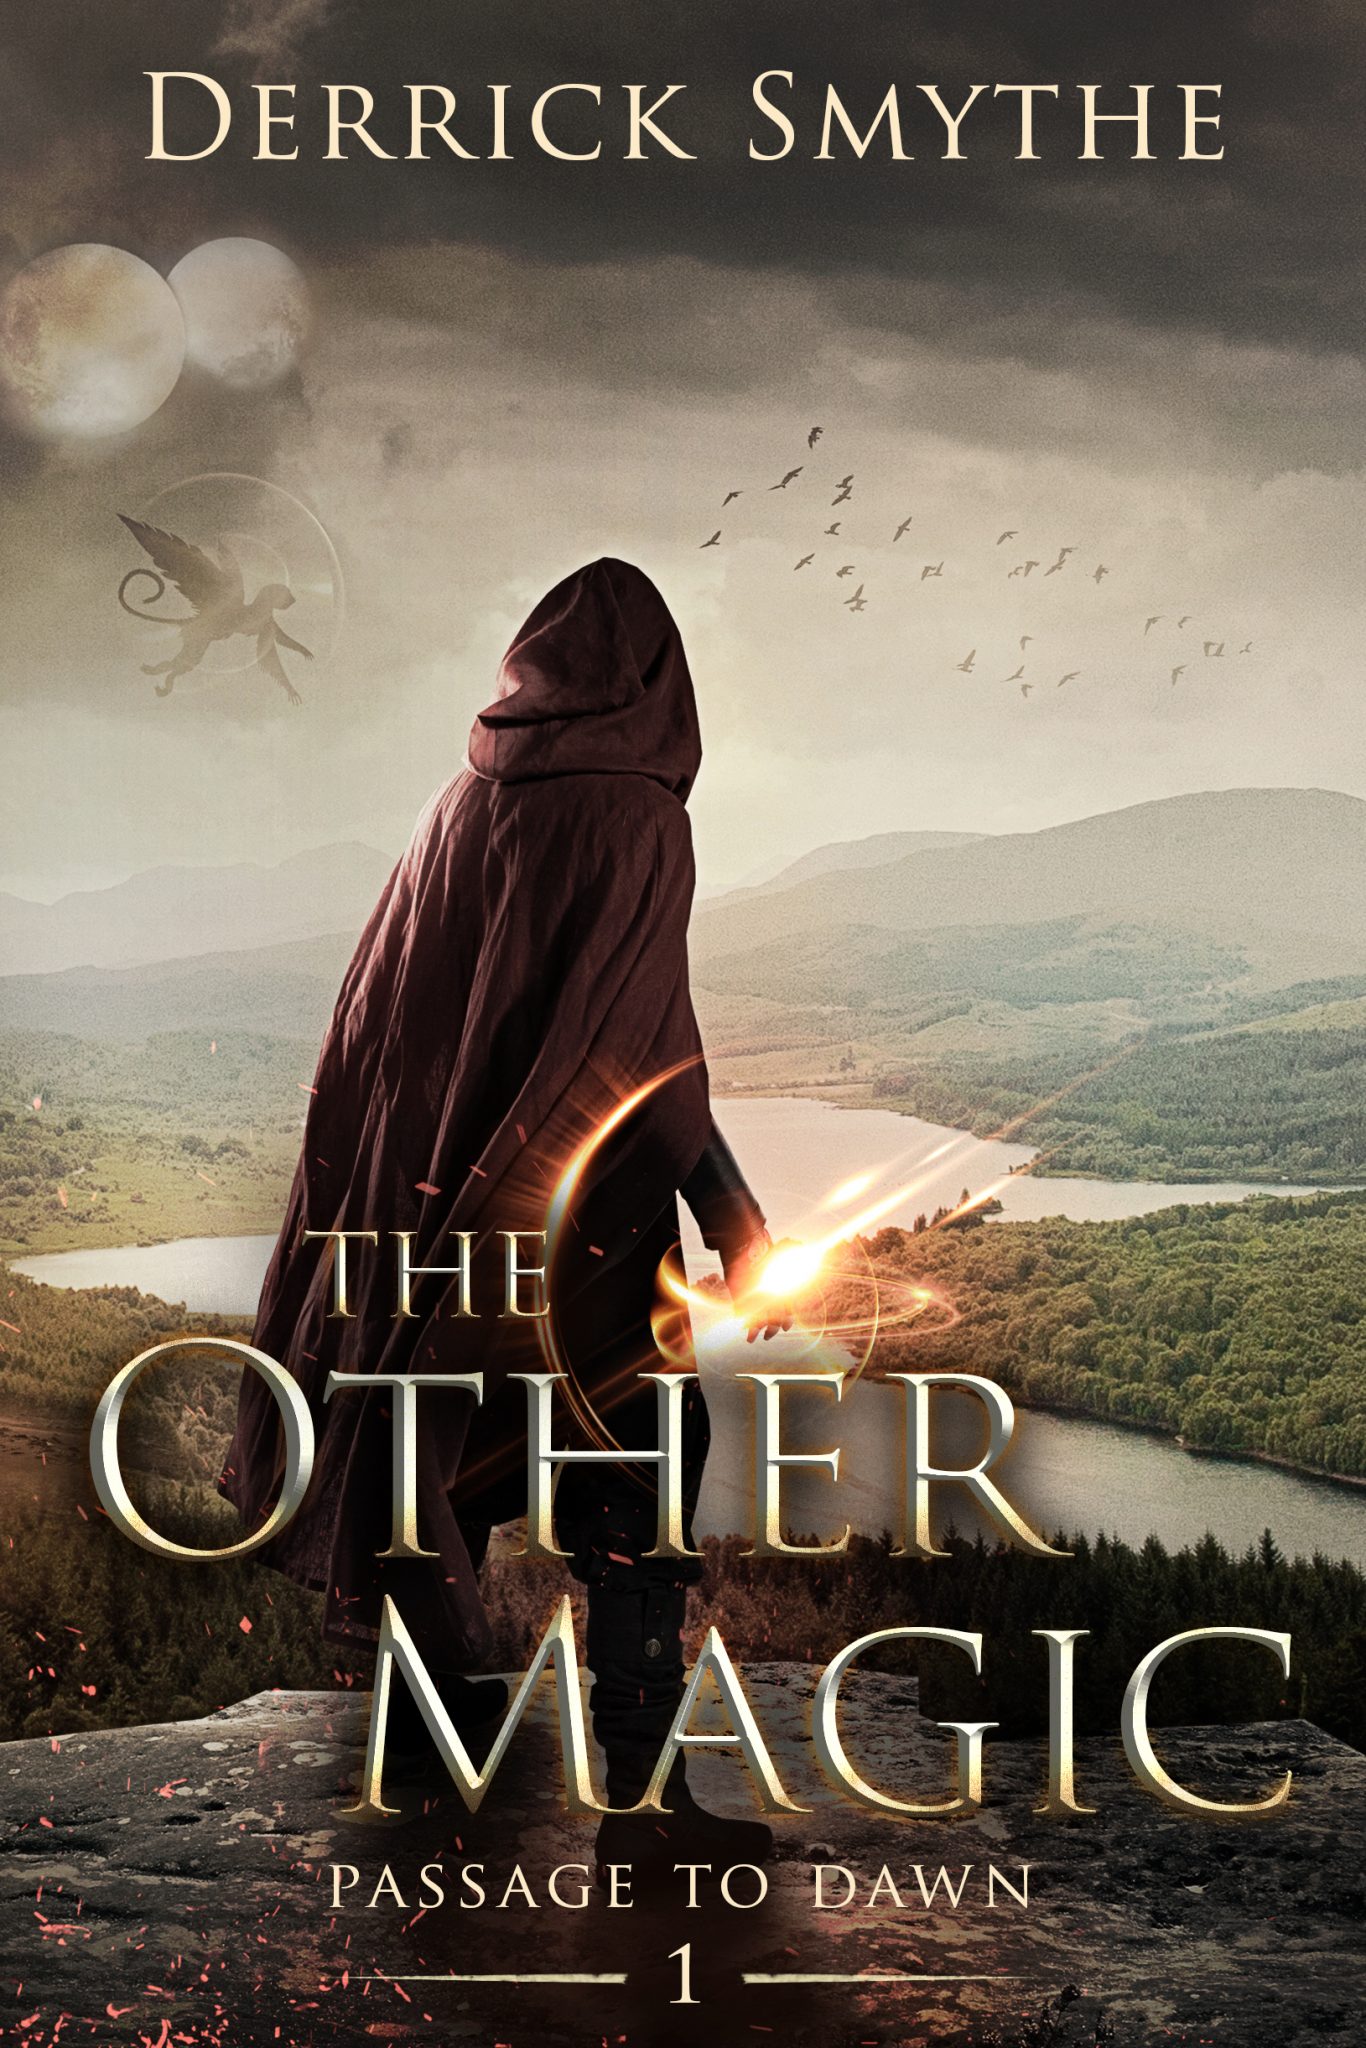 The Other Magic by Derrick Smythe